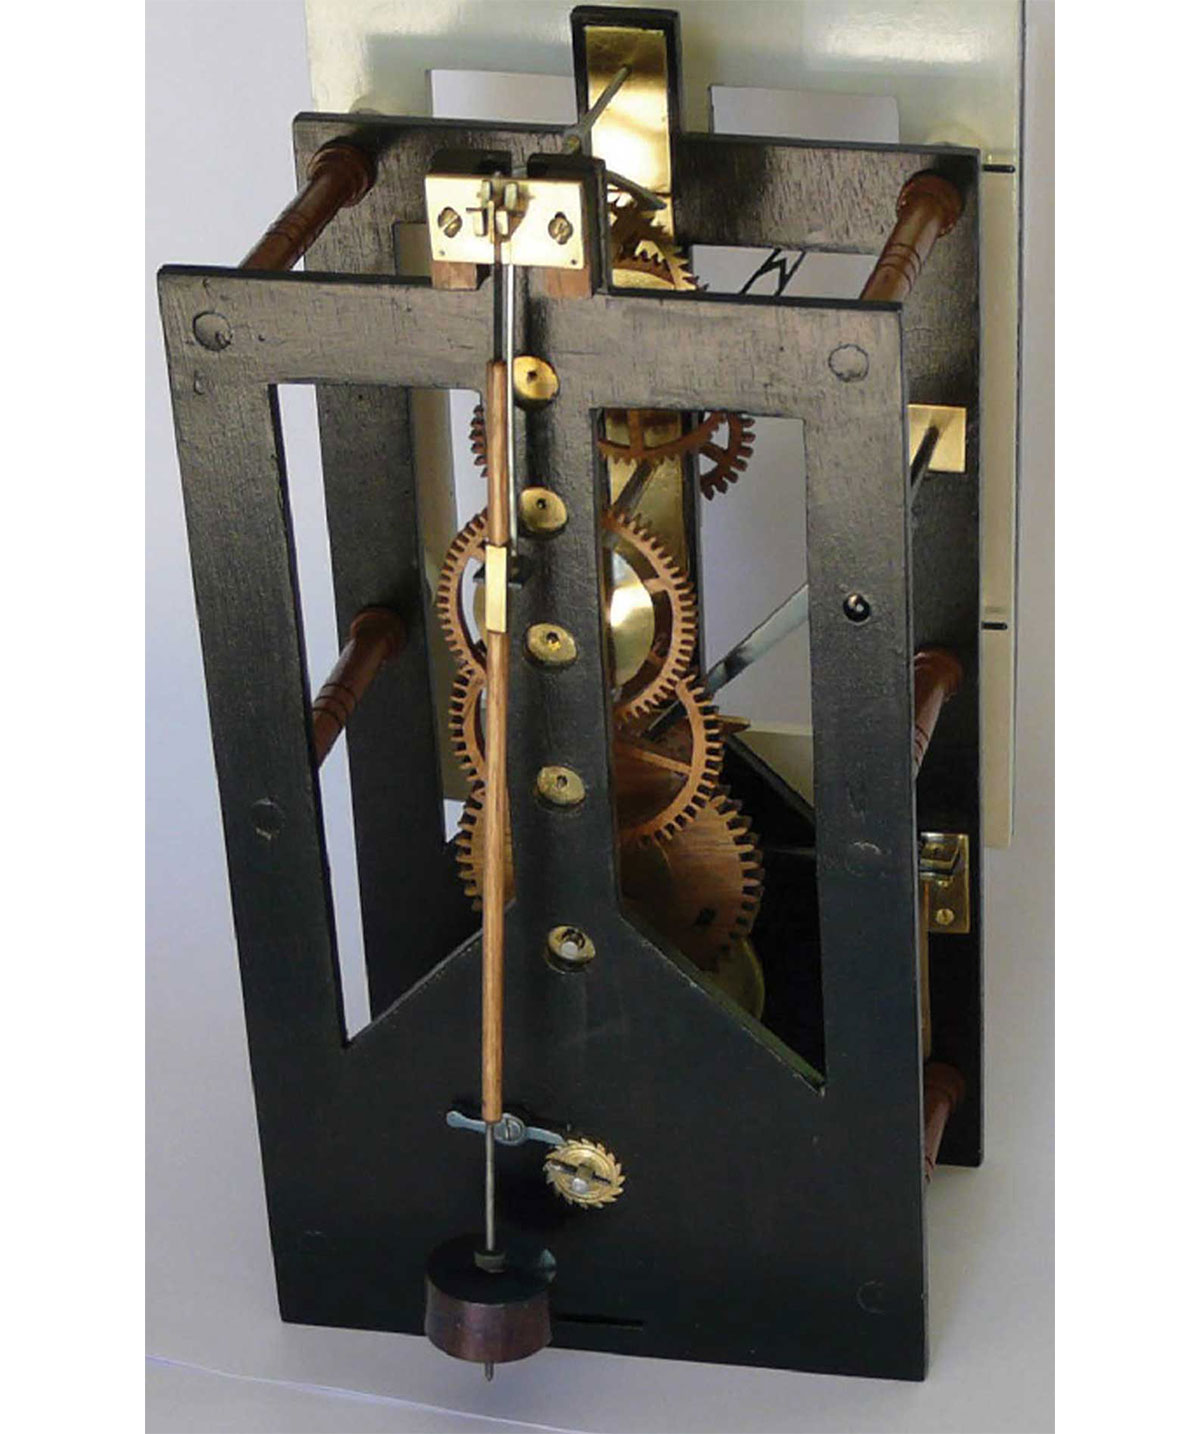 A black painted finished clock case with pendulum and gears exposed